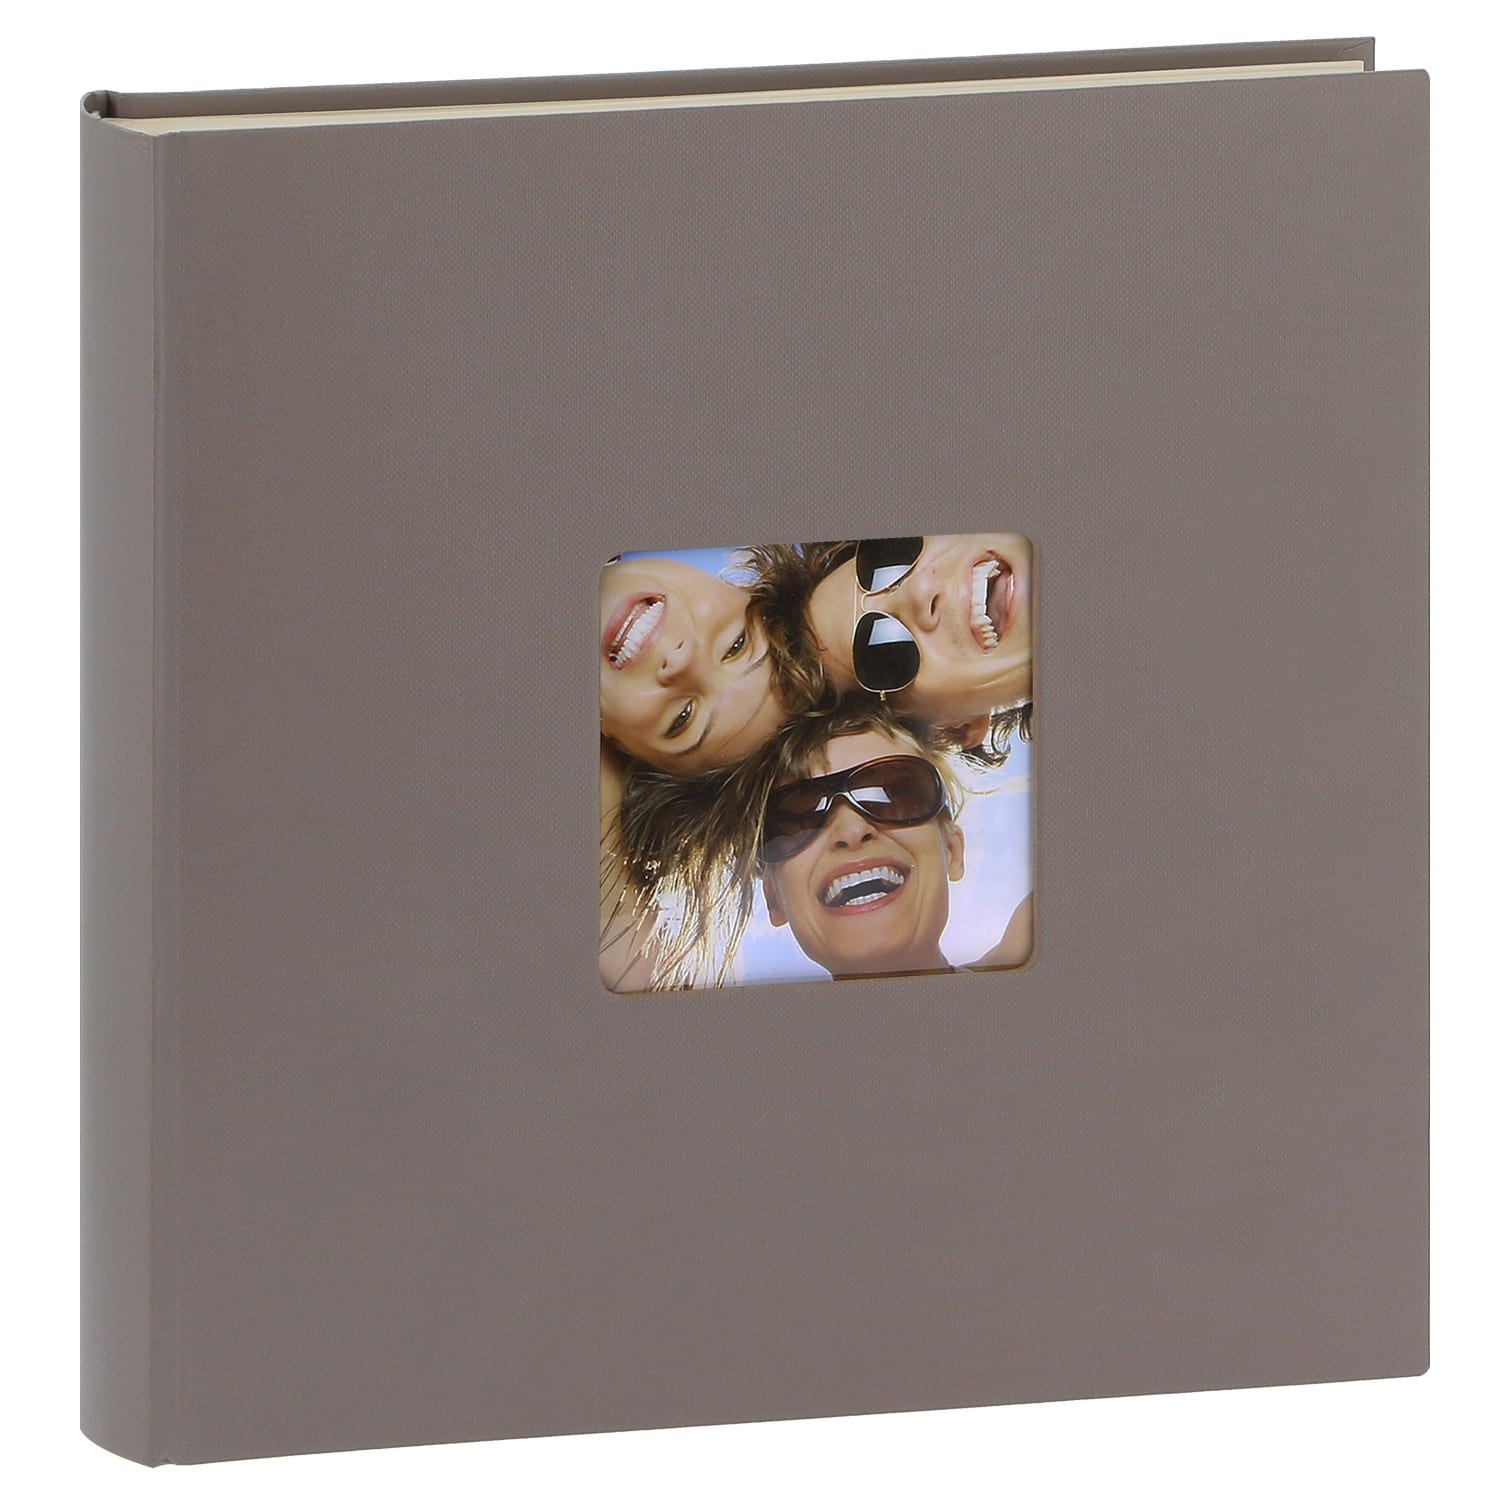 Album photo WALTHER DESIGN traditionnel FUN - 100 pages blanches +